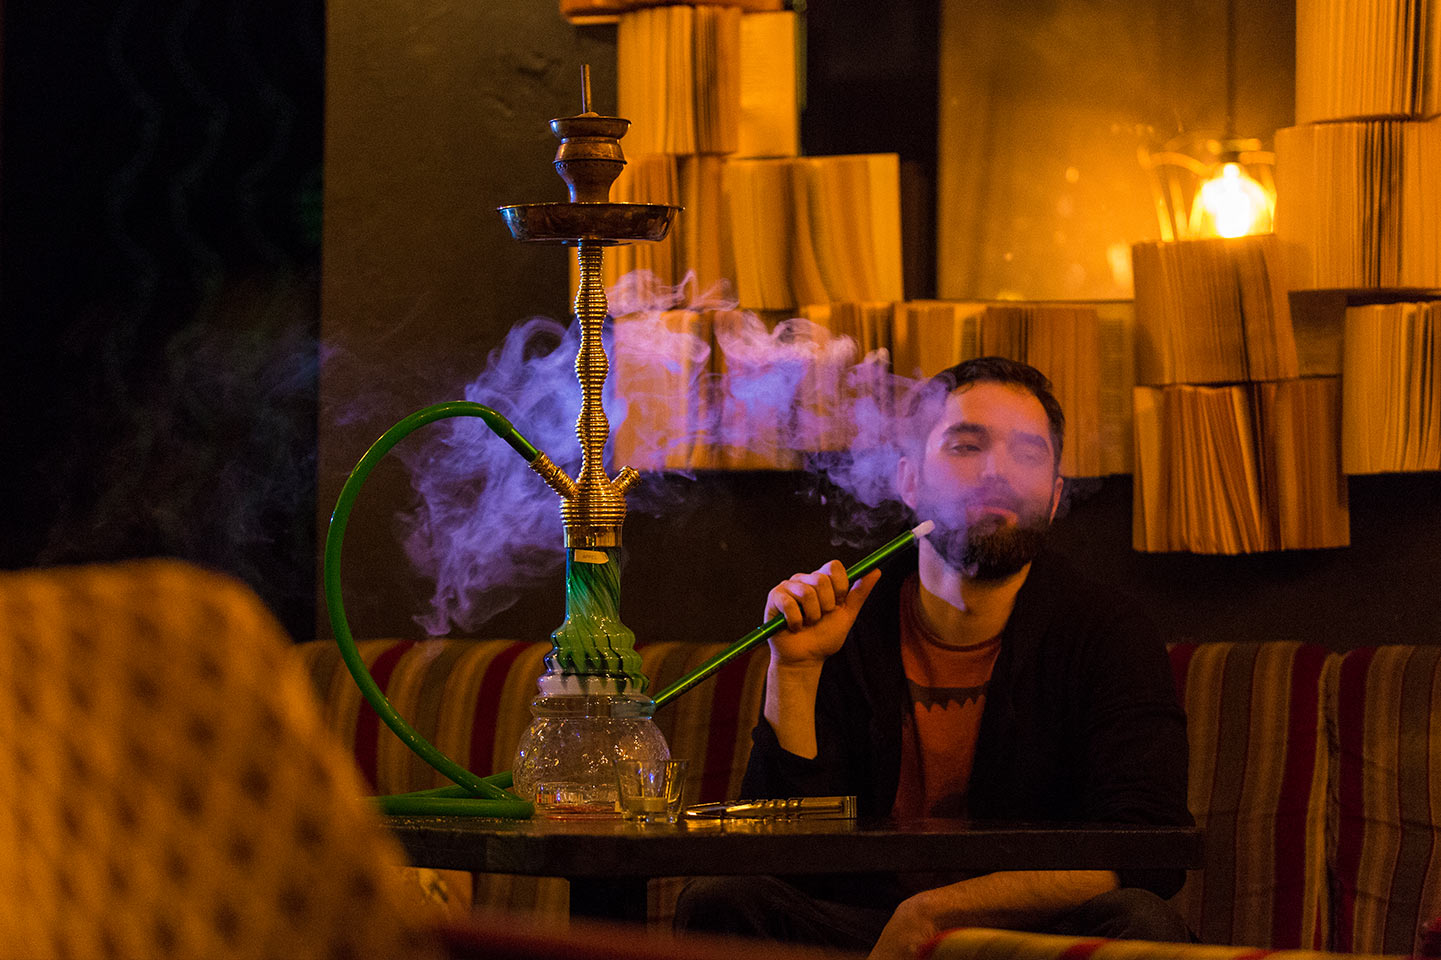 Hookah bars pose fire hazards and violate state fire safety regulations, compromising the safety of food items and putting public health at risk. (Representational pic/Wikimedia Commons)